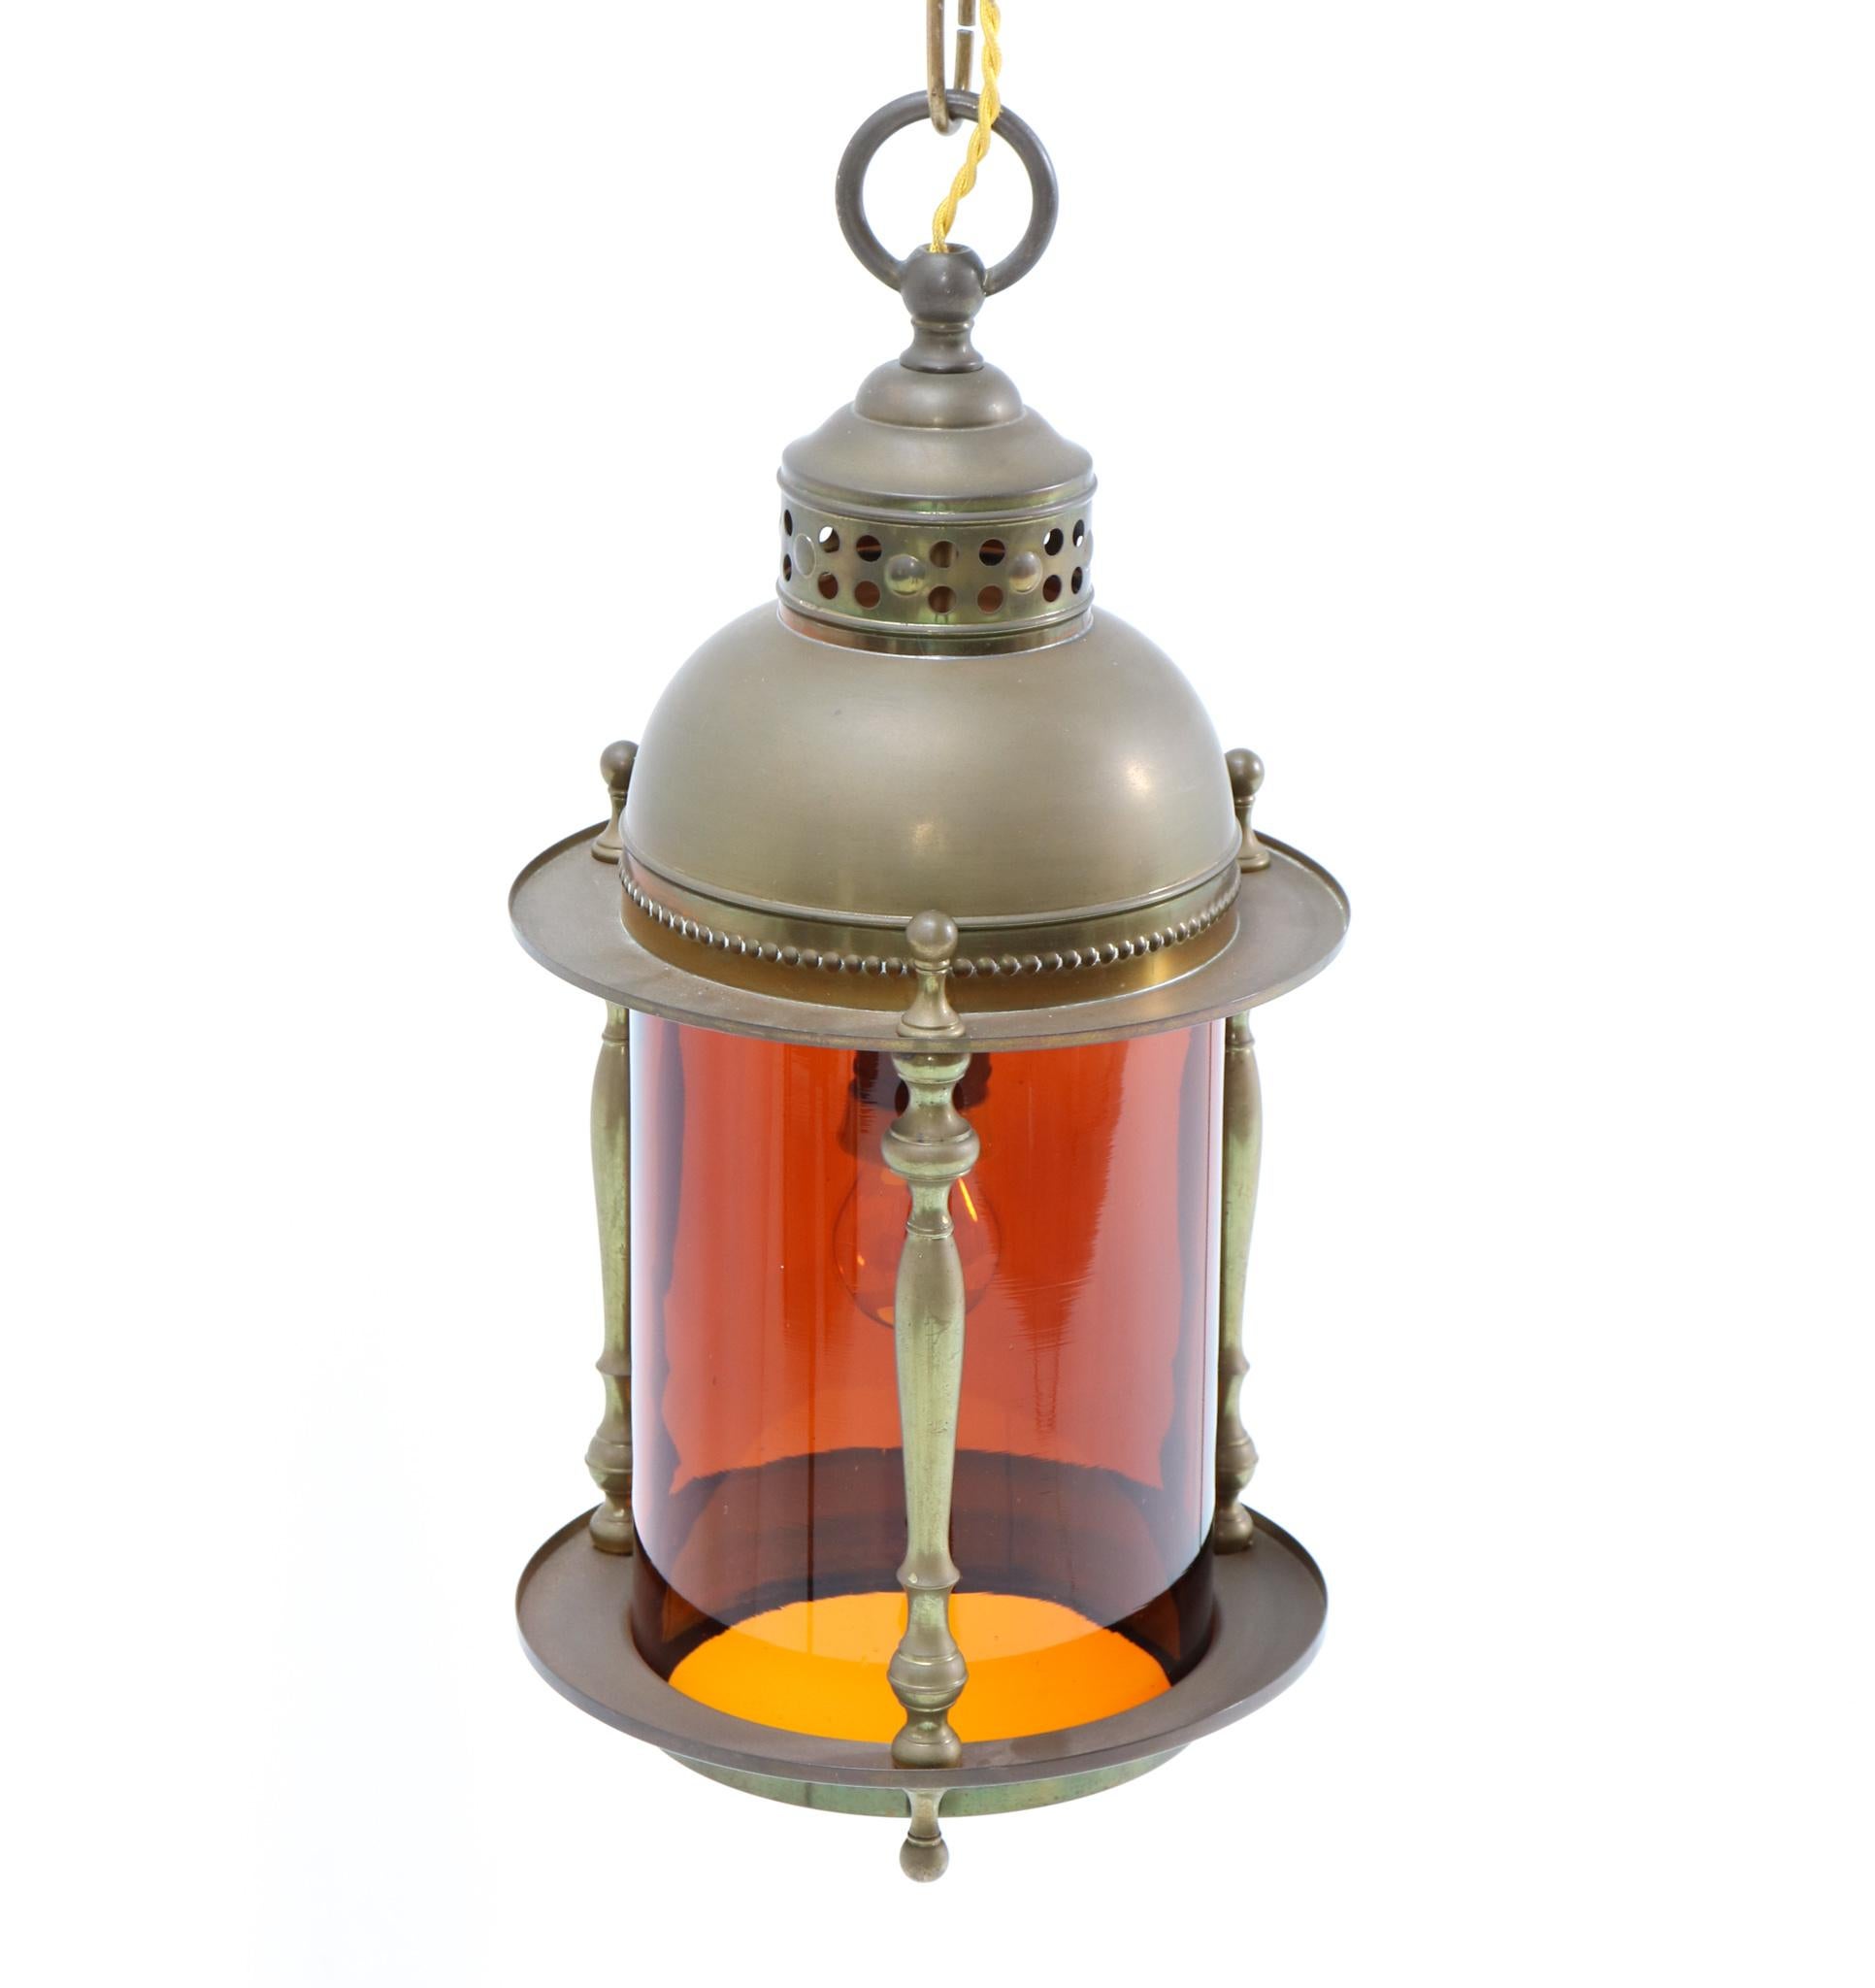 Stunning Art Nouveau hall lantern.
Striking Dutch design from the 1900s.
Patinated brass frame with original glass shade.
Rewired with one original socket for E-27 light bulb.
This wonderful Art Nouveau lantern is in very good condition and has